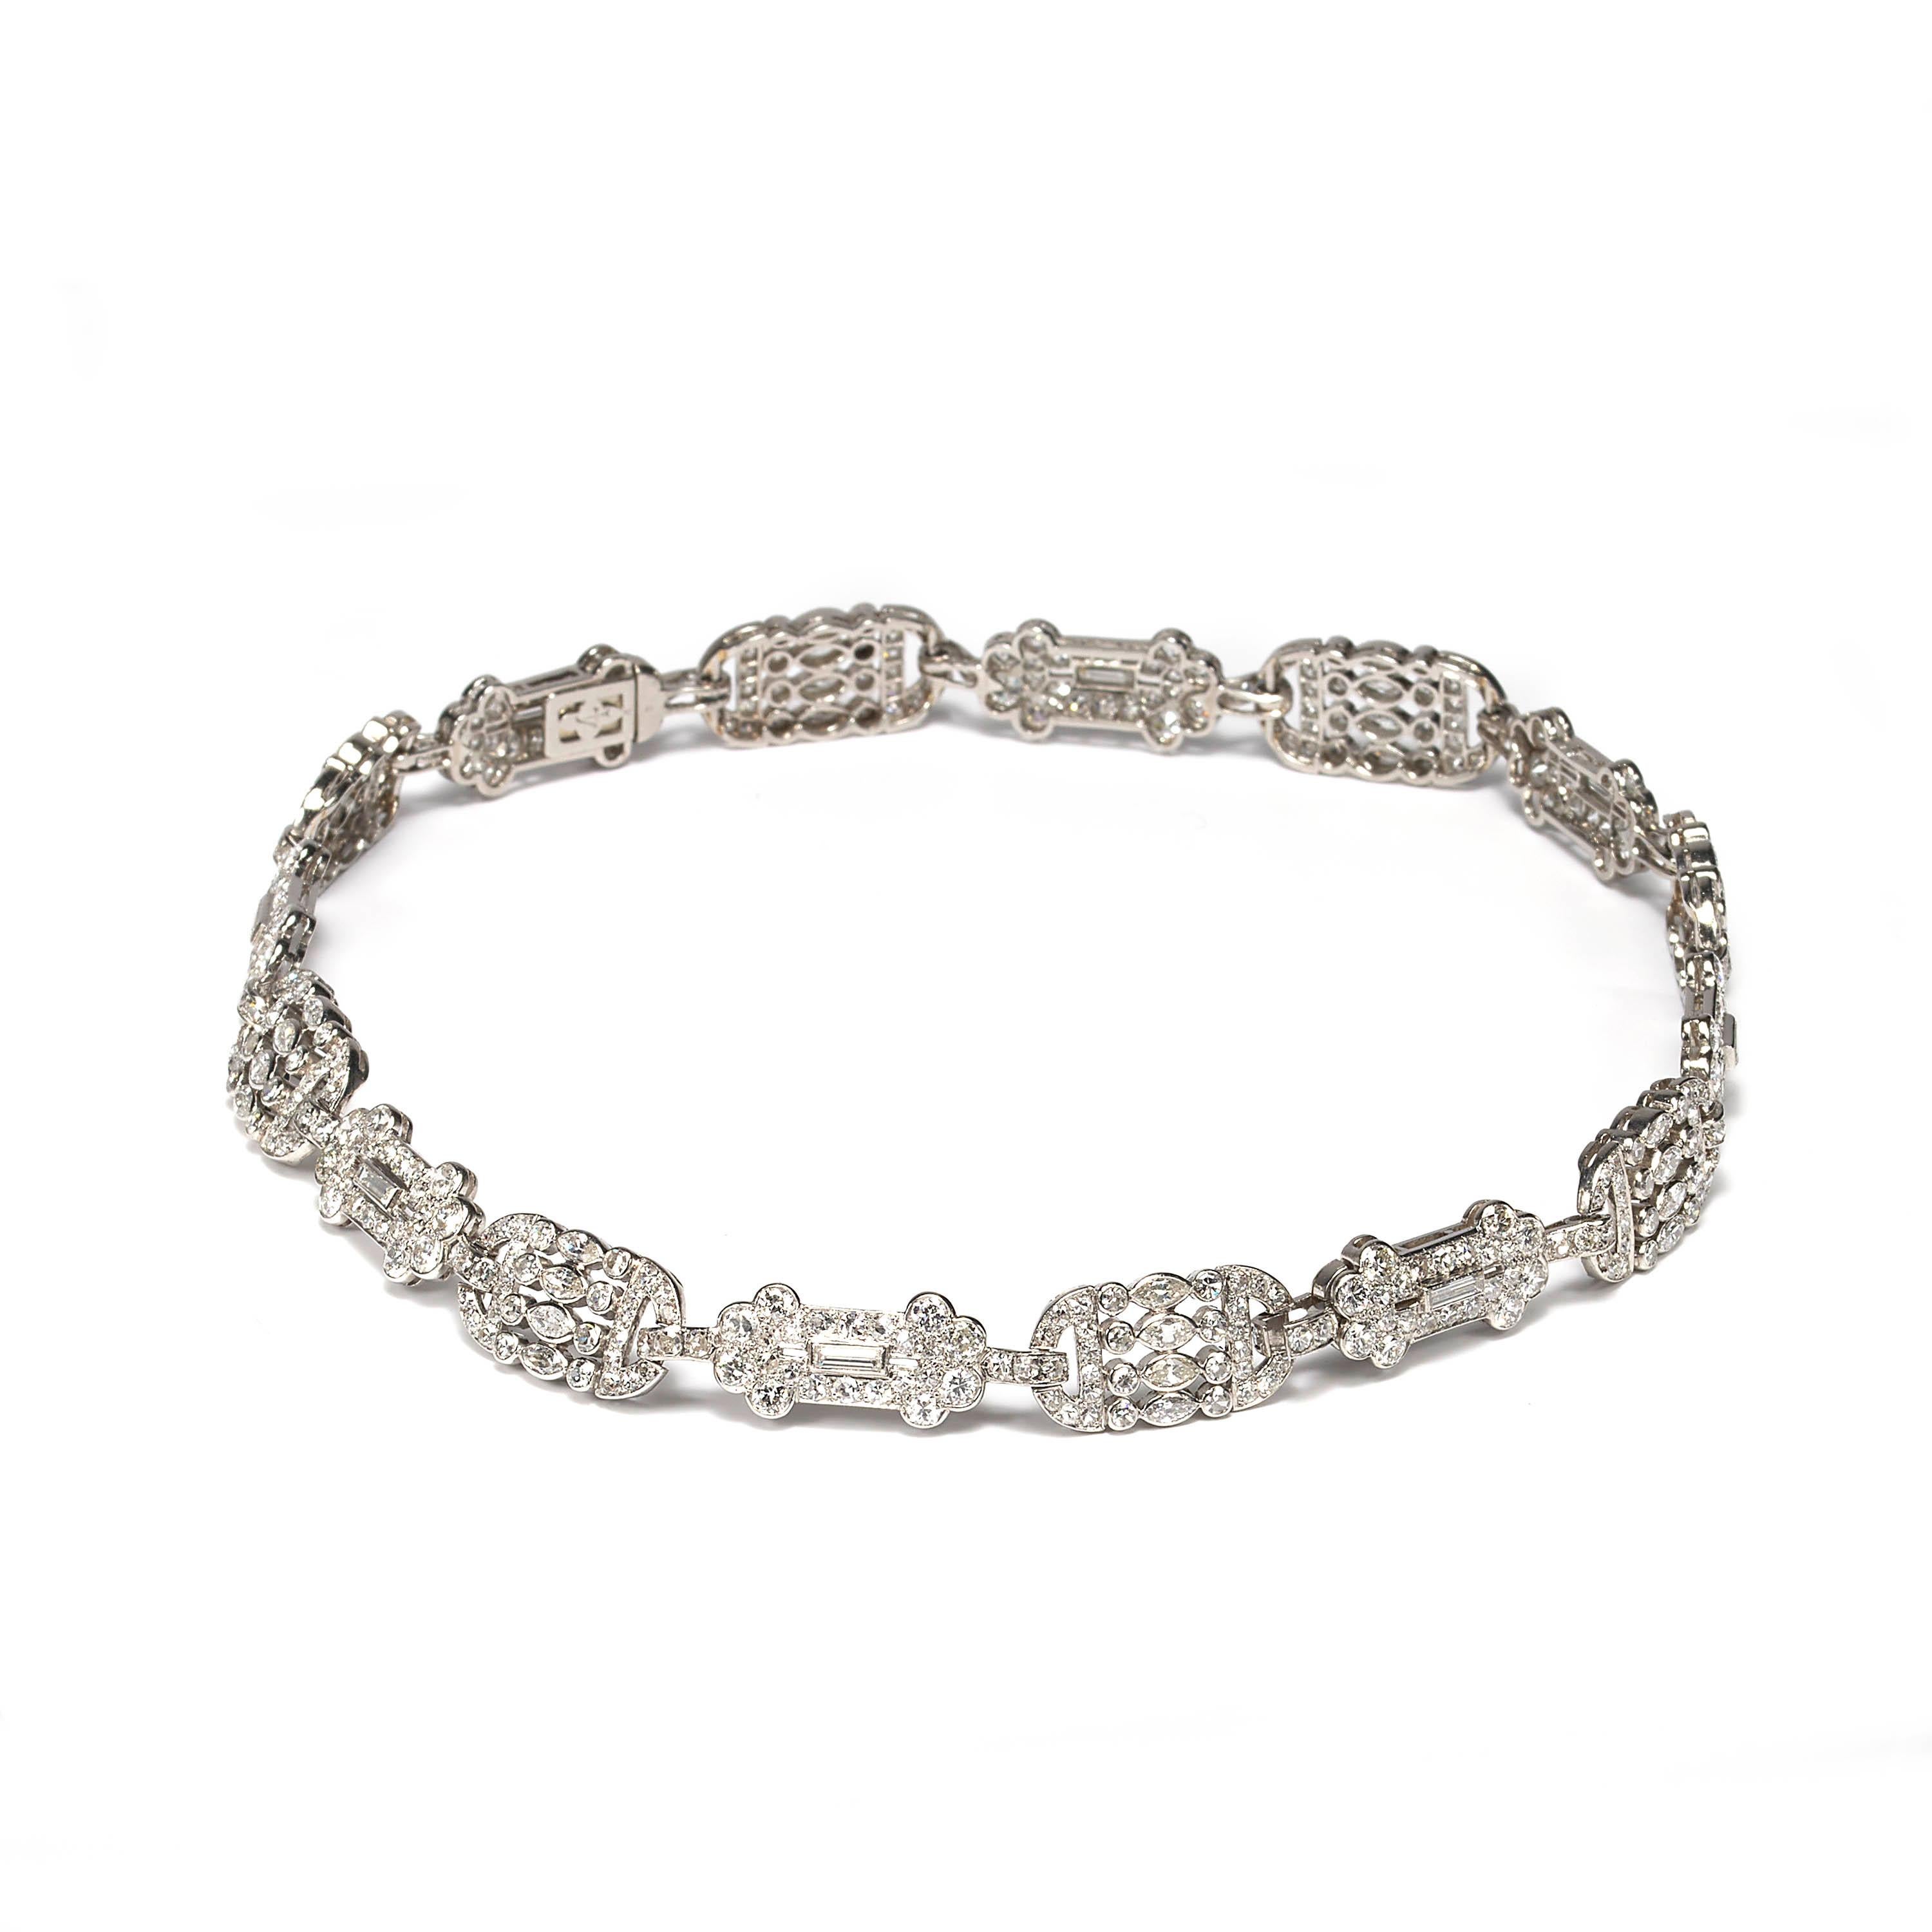 Belle Époque Early 20th Century French Diamond Necklace or Bracelets For Sale